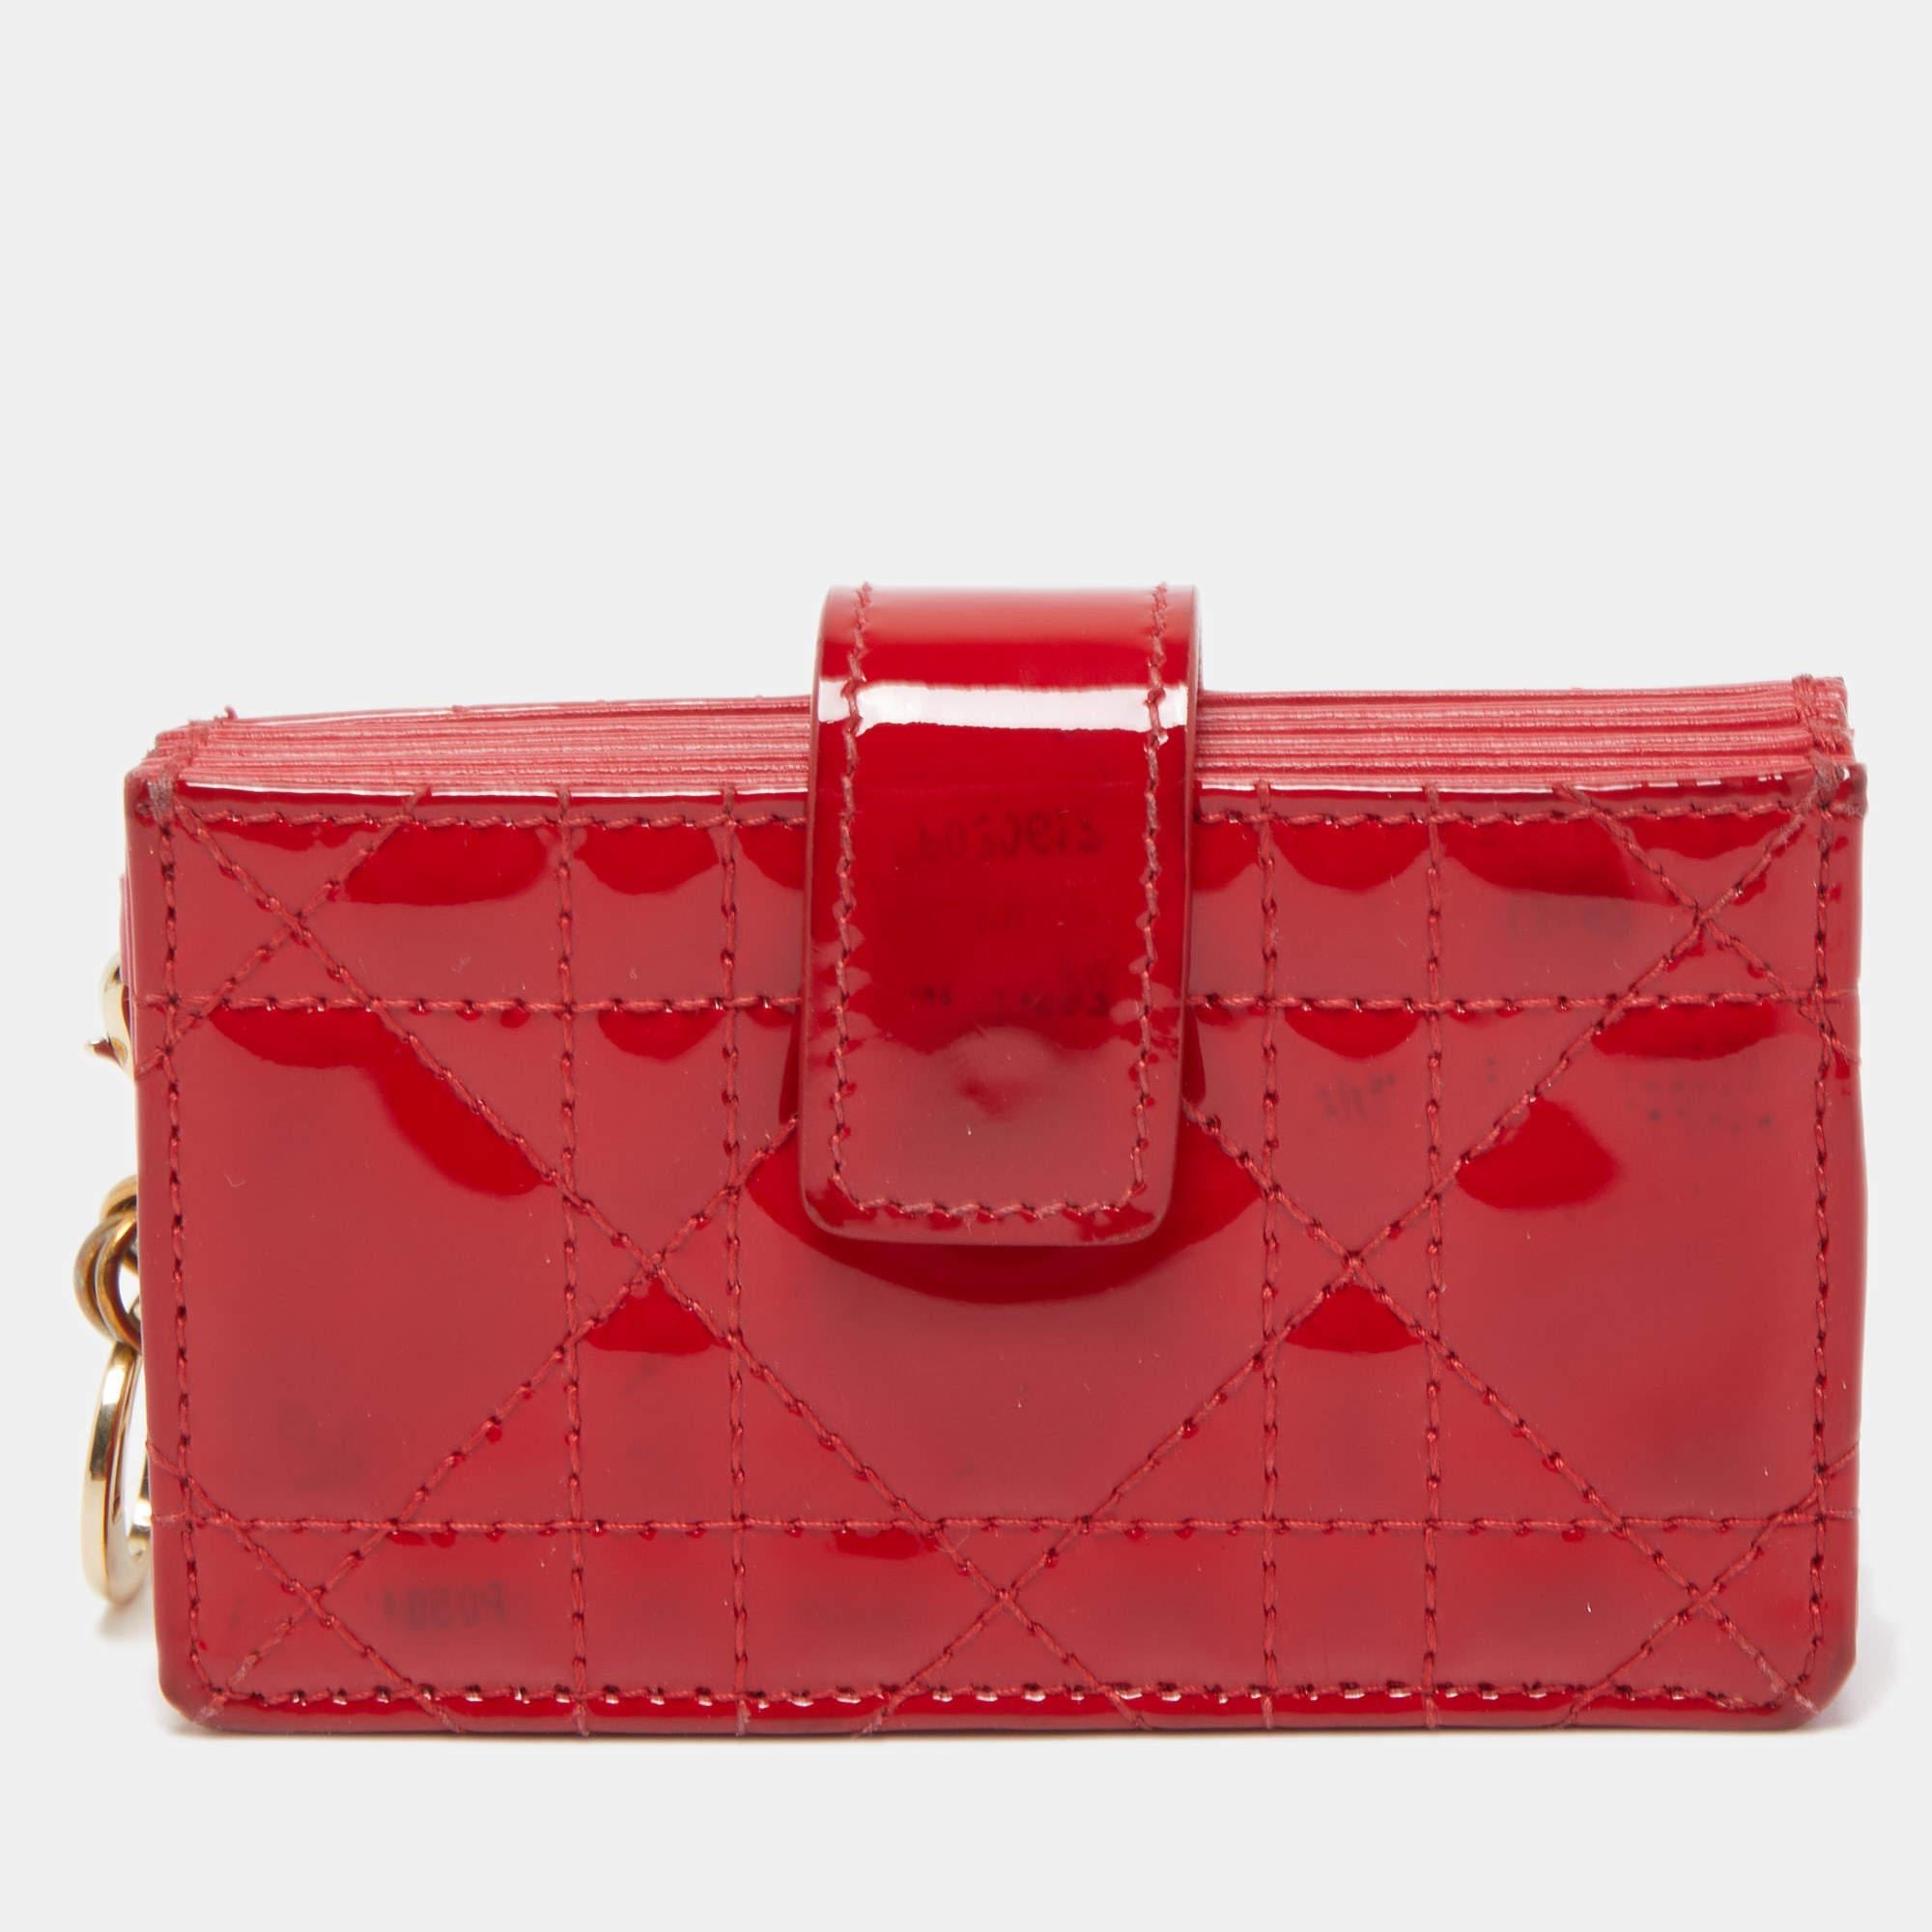 The Lady Dior gusset card case is a Dior creation that is functional, durable, and high on style! This red case has been crafted from patent leather and it carries the signature Cannage quilt. It features a front cross-over flap and opens to a nylon